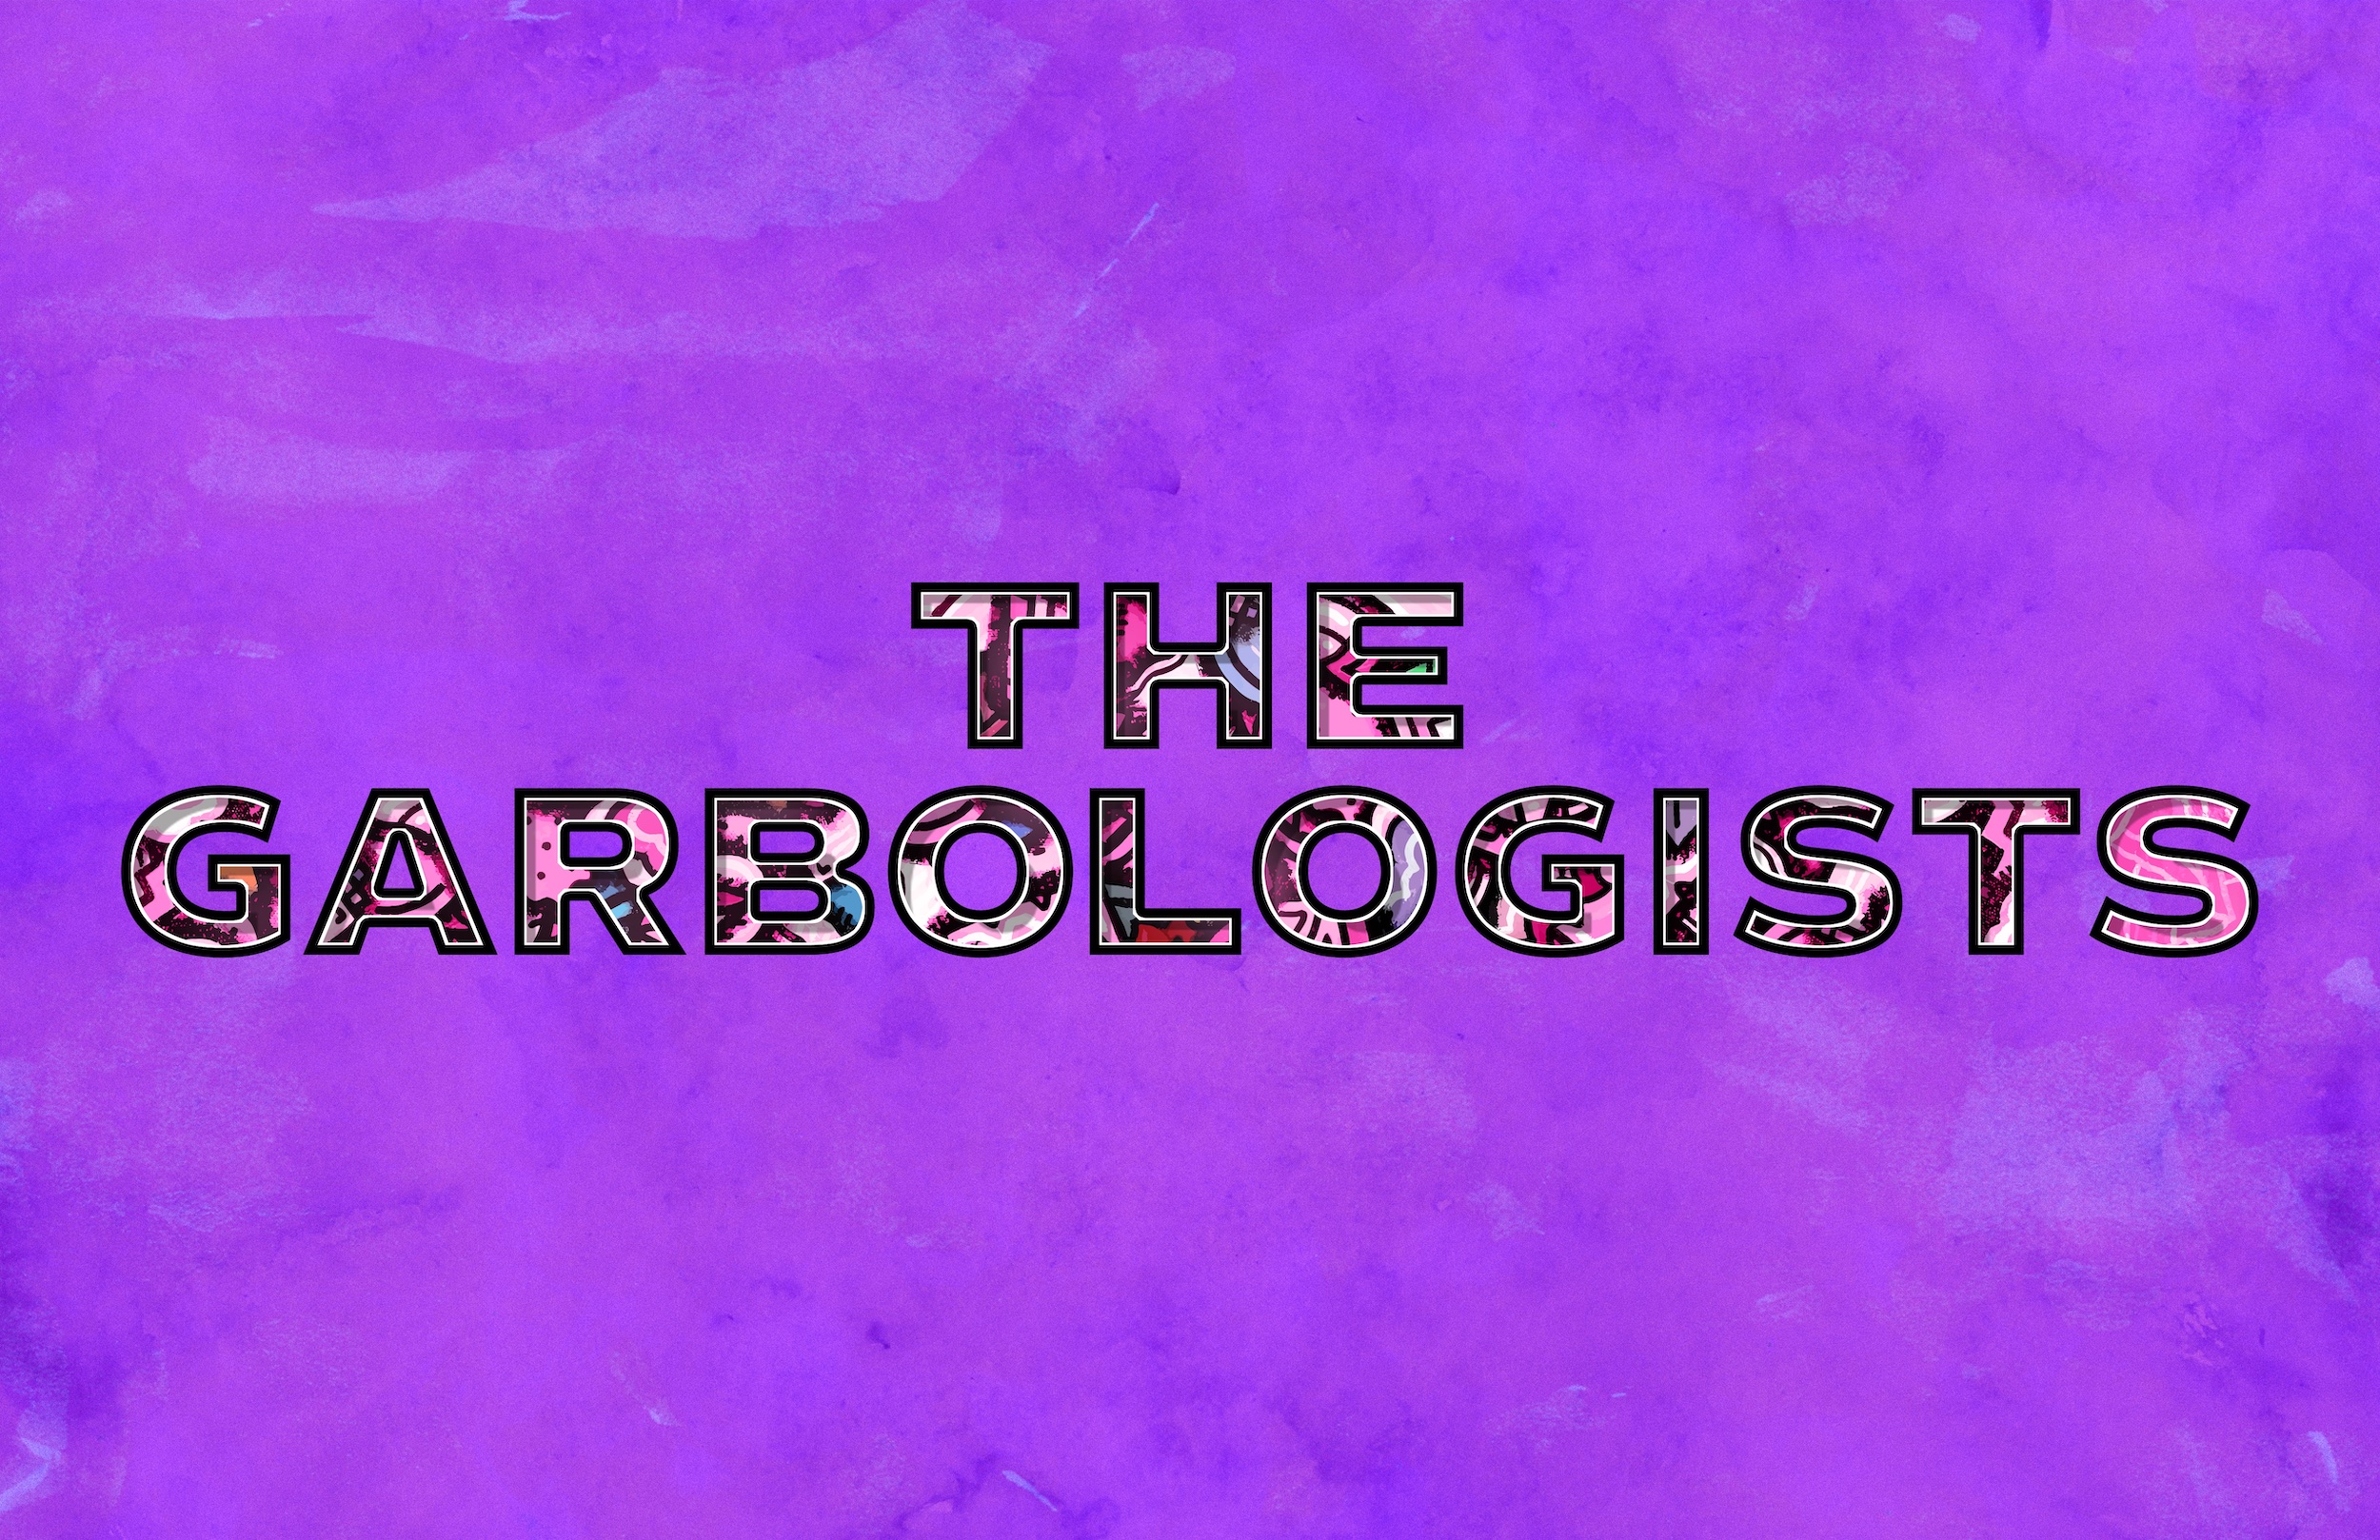 The Garbologists title as a logo, on purple mottled background